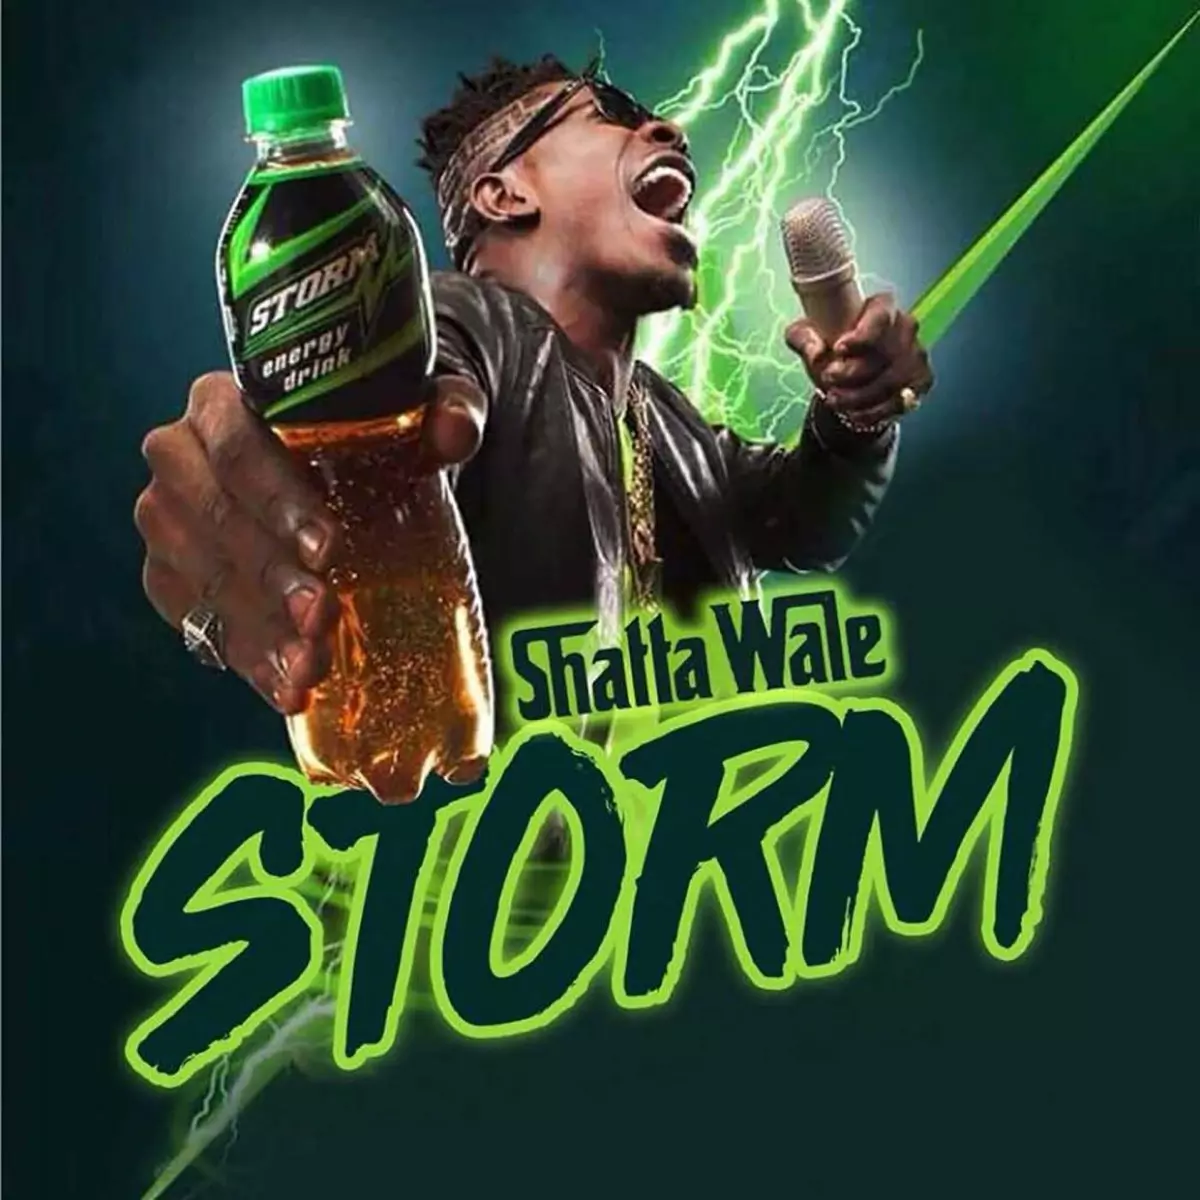 Storm - Single by Shatta Wale on Apple Music